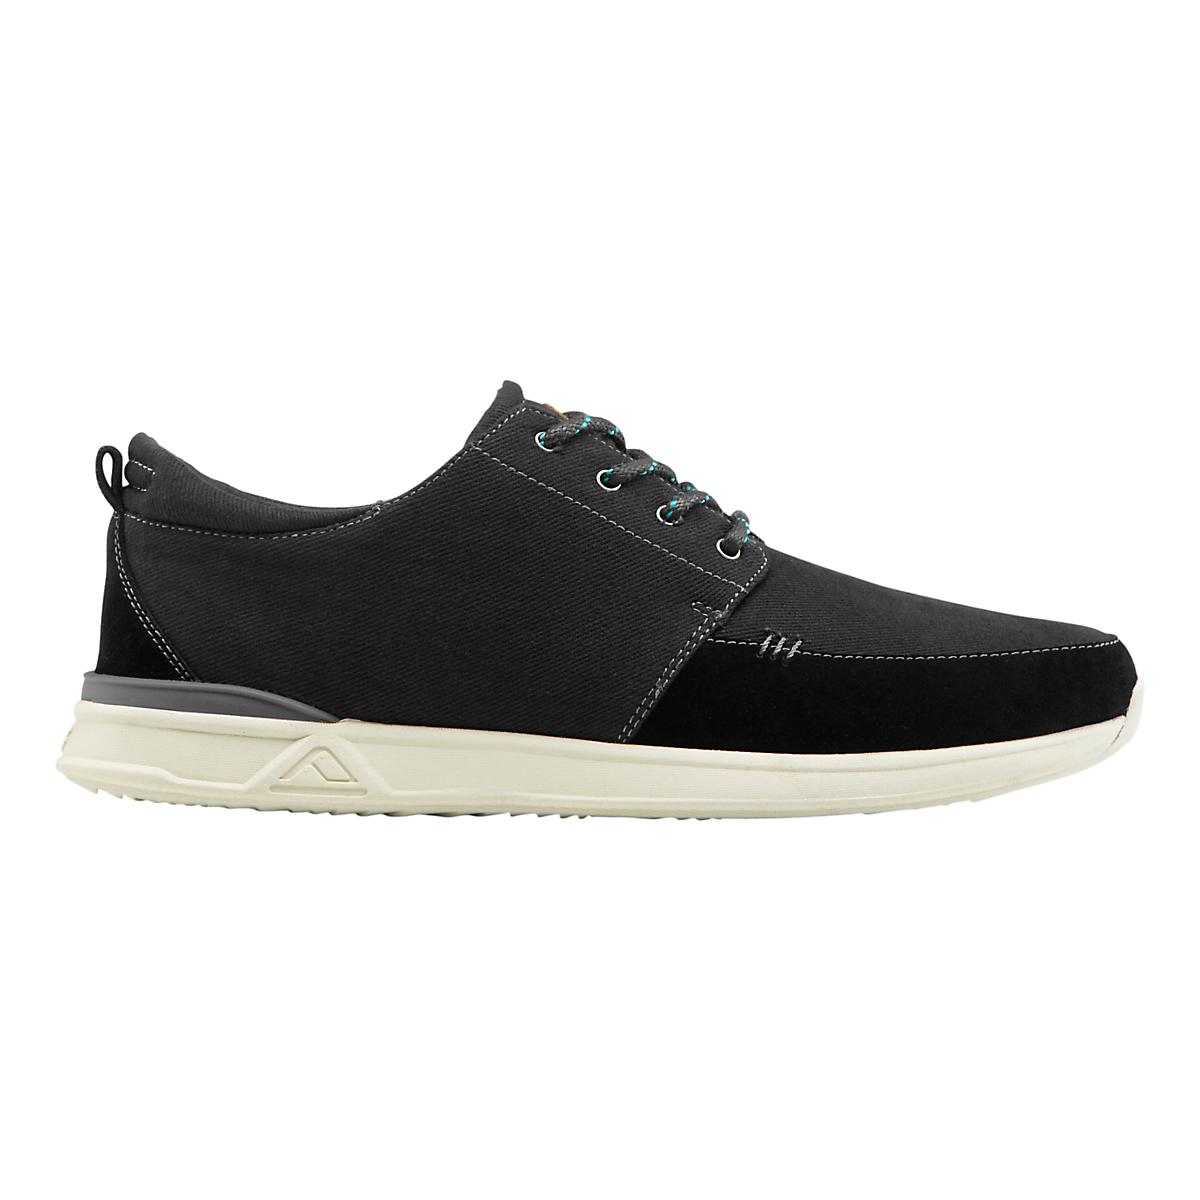 Mens Reef Rover Low Casual Shoe at Road Runner Sports